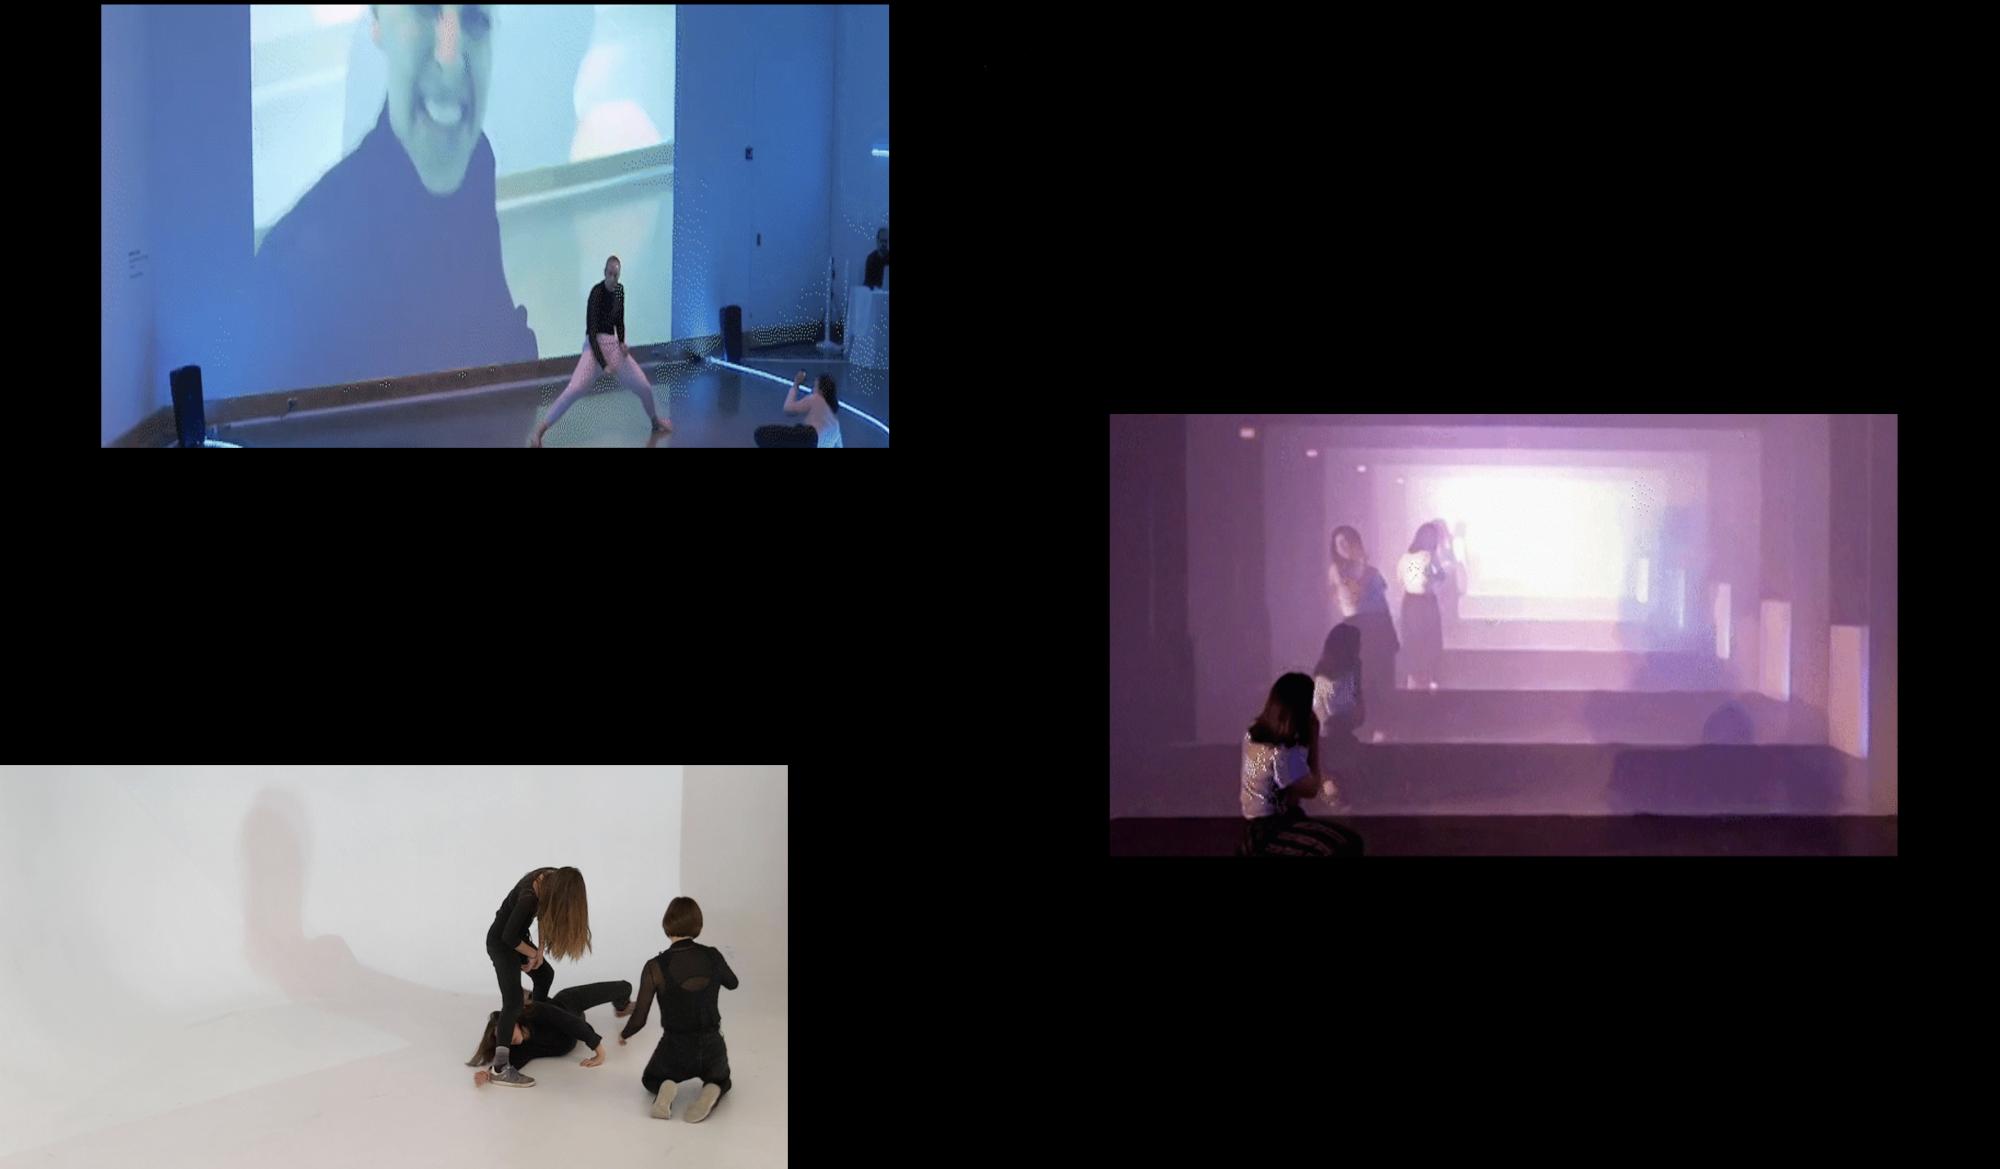 three images of people dancing float across a black screen